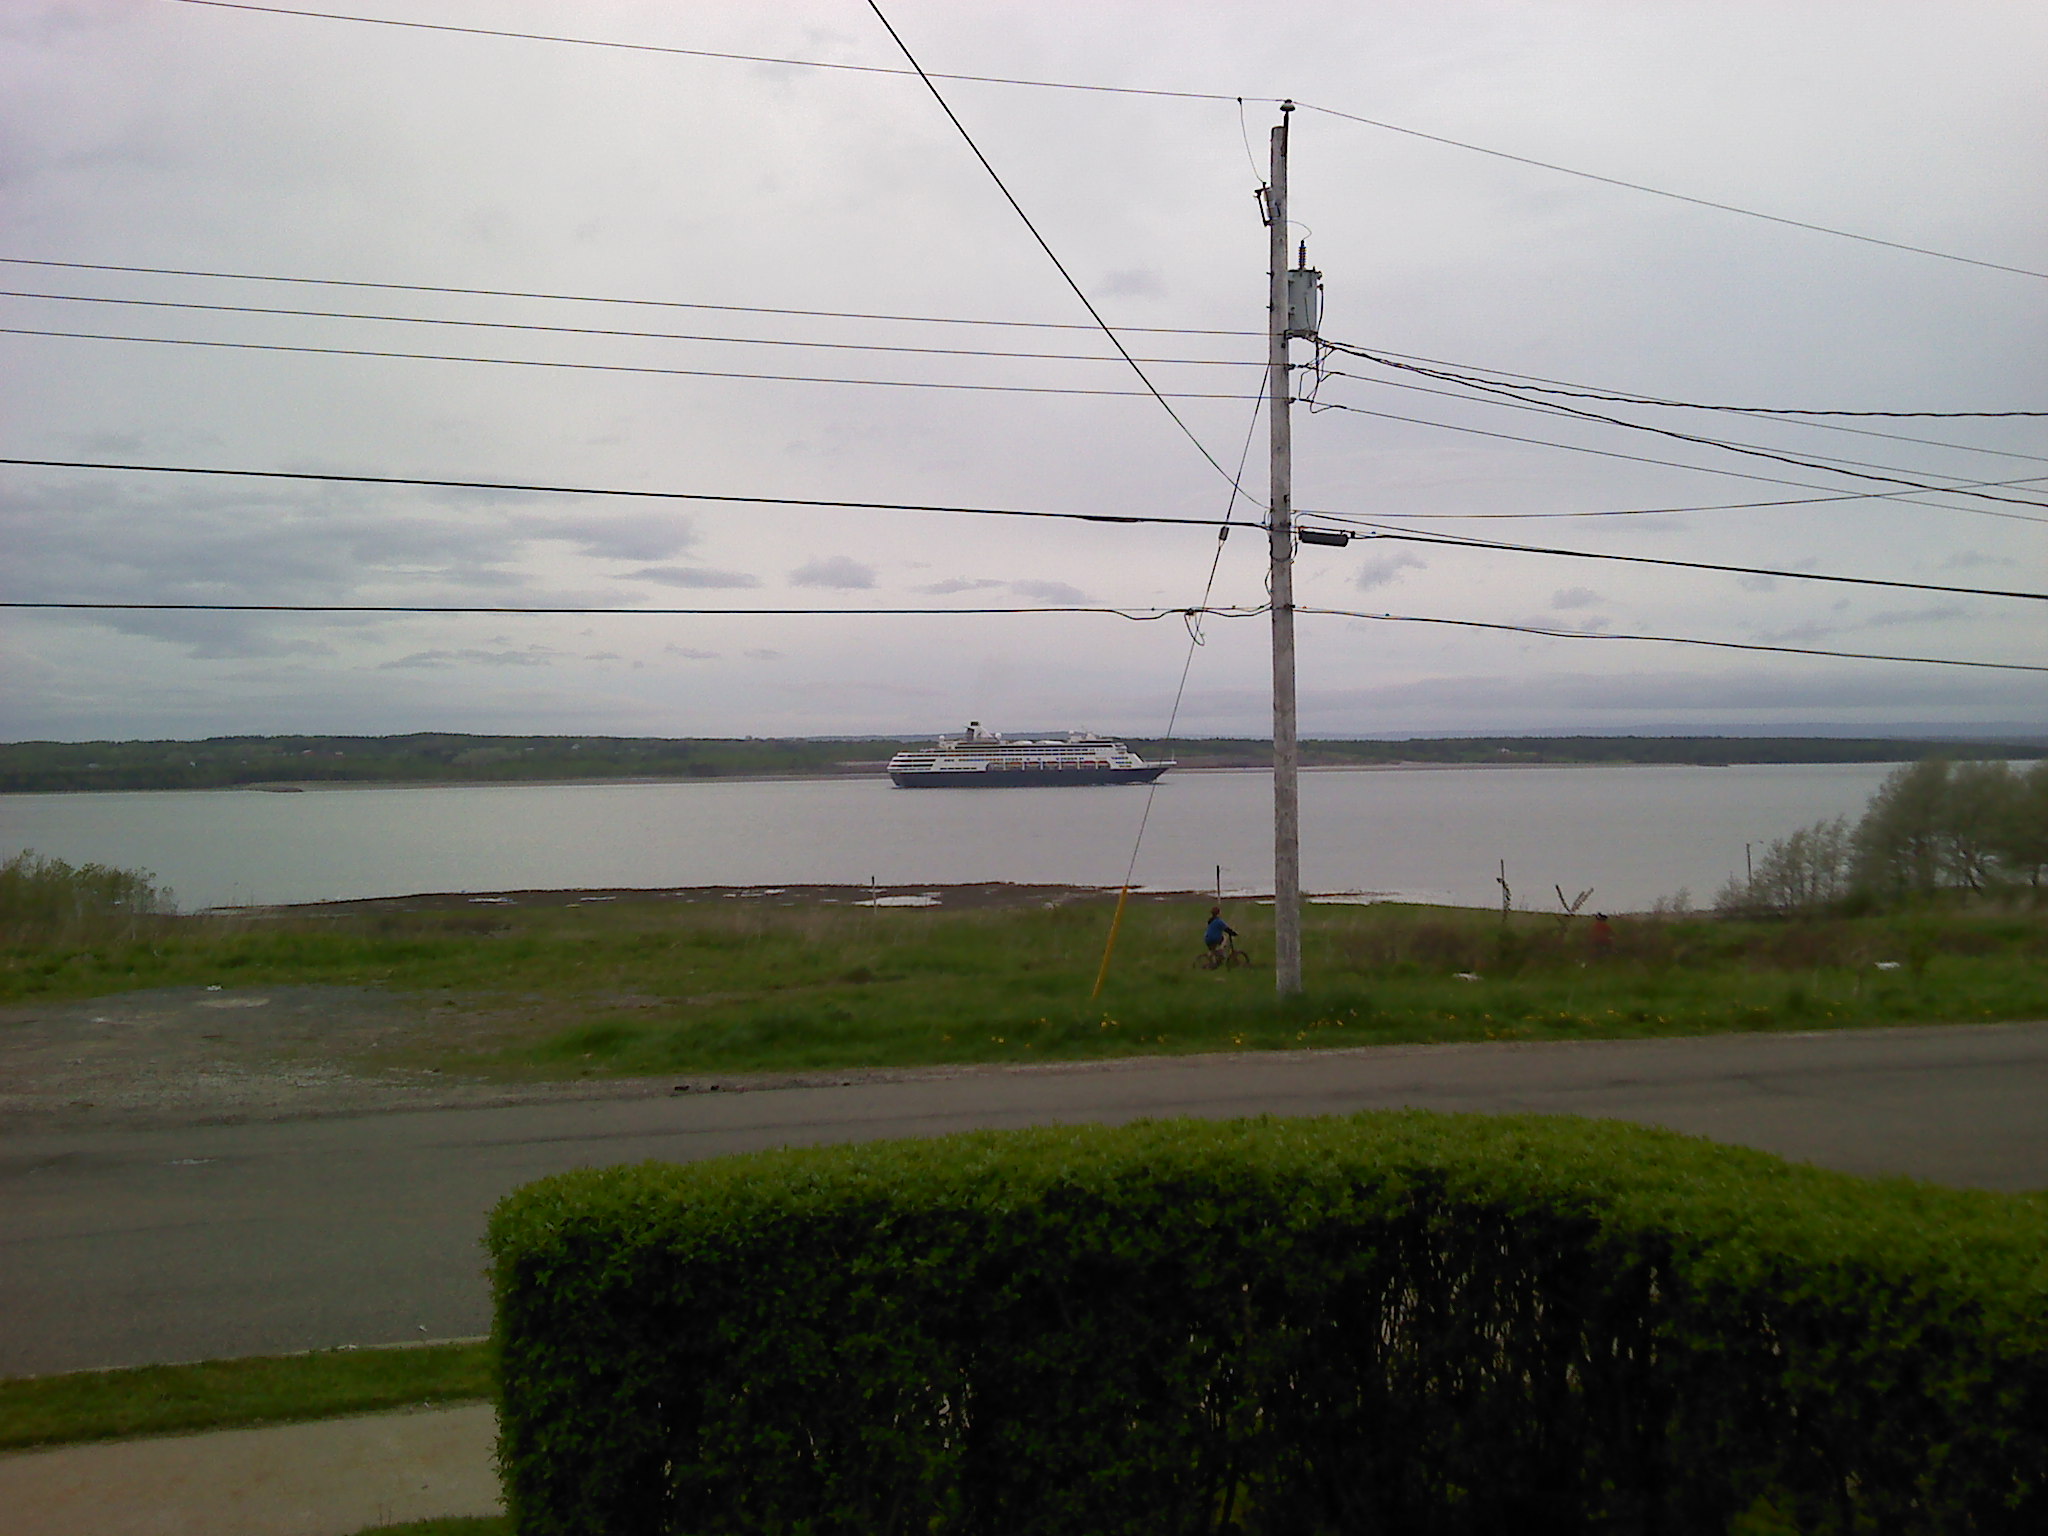 Cruise Ship leaving with a lot of Tourists from North America and Rest of the World because the Rain is Coming.